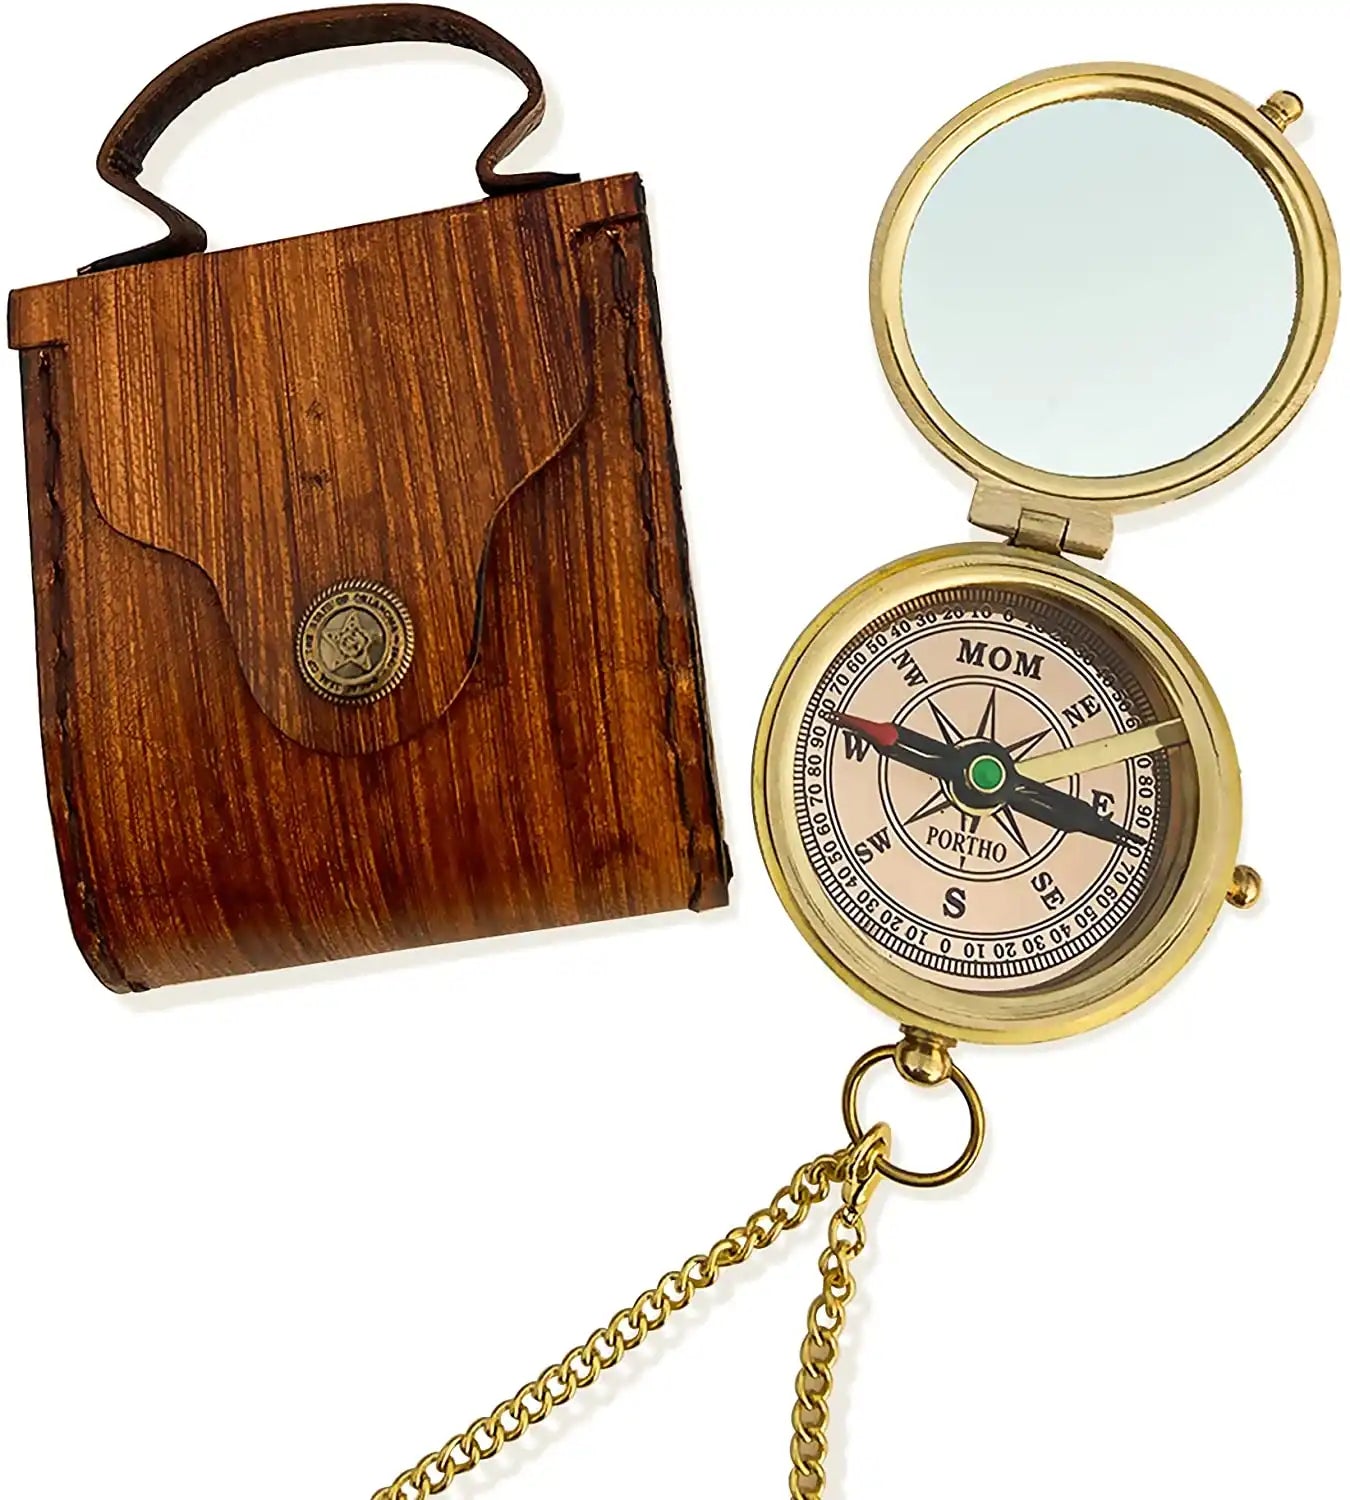 Gifts for Mom from Daughter or Son - Mom's Compass Gold Makeup Mirror - Birthday, Mothers Day, Mother of The Bride, Sentimental & Meaningful Gifts Ideas for Mother, Pocket Hand Mirror